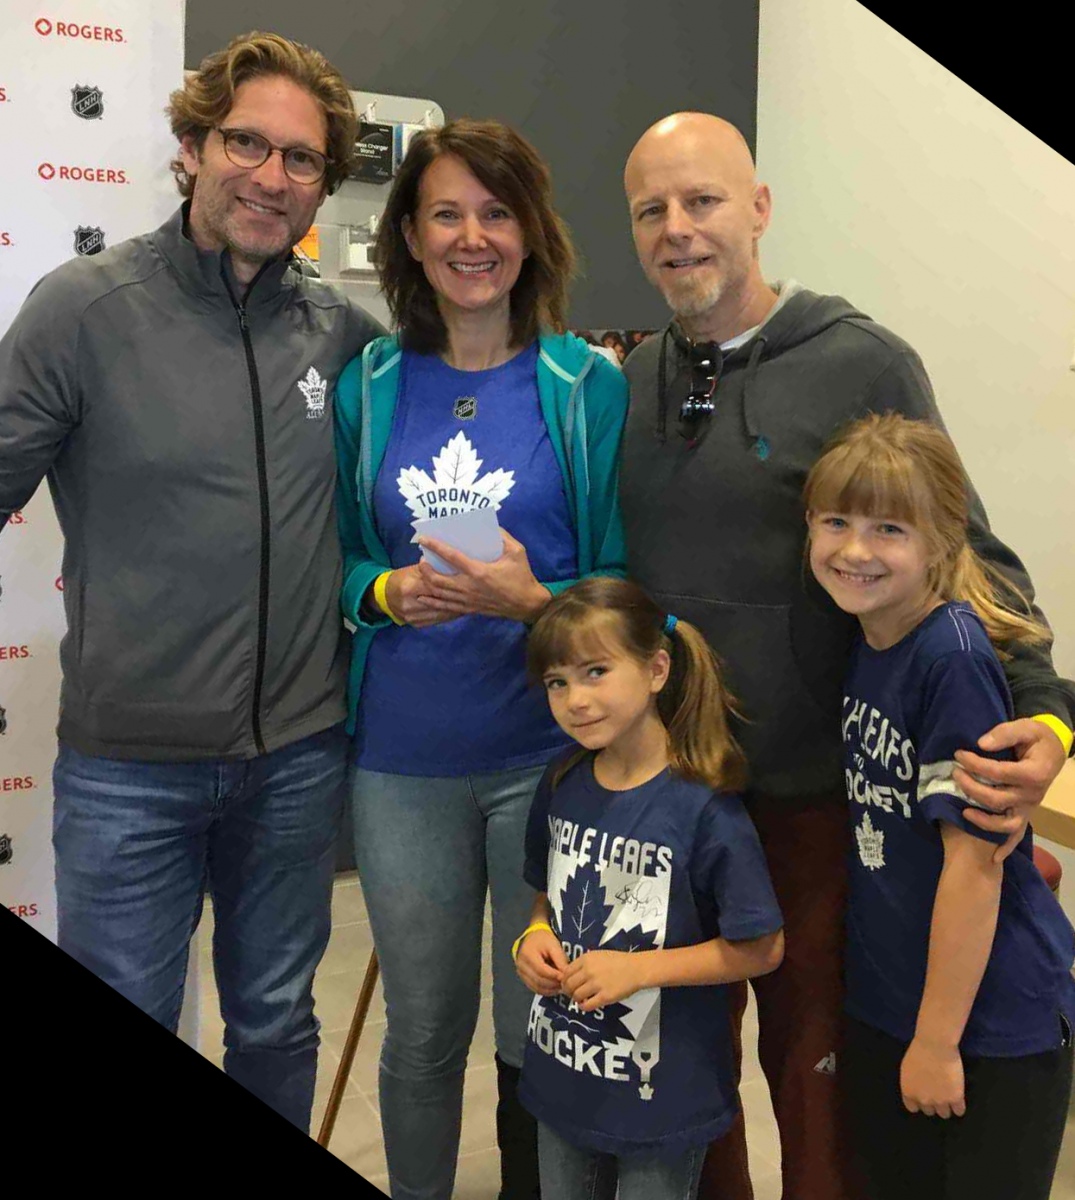 Shayne-Corson-of-the-Leafs-in-St.-Johns-for-alumni-game-Sep14-2019